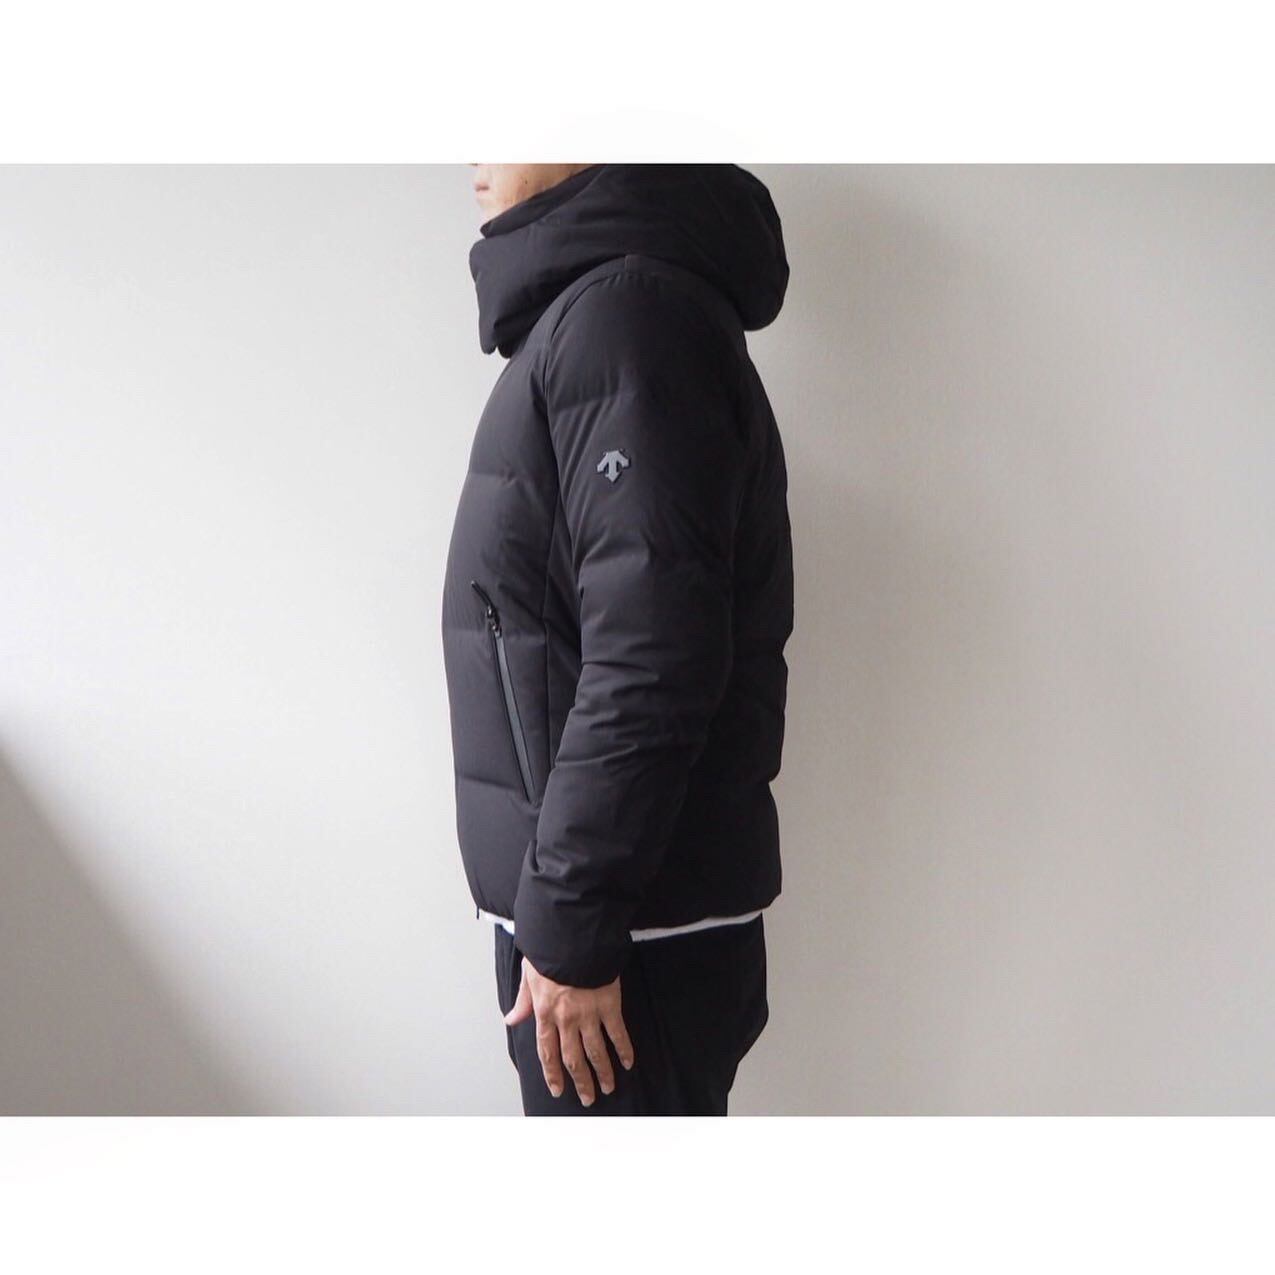 DESCENTE ALLTERRAIN (デサント オルテライン) MIZUSAWA DOWN JACKET『ANCHOR』 | AUTHENTIC  Life Store powered by BASE